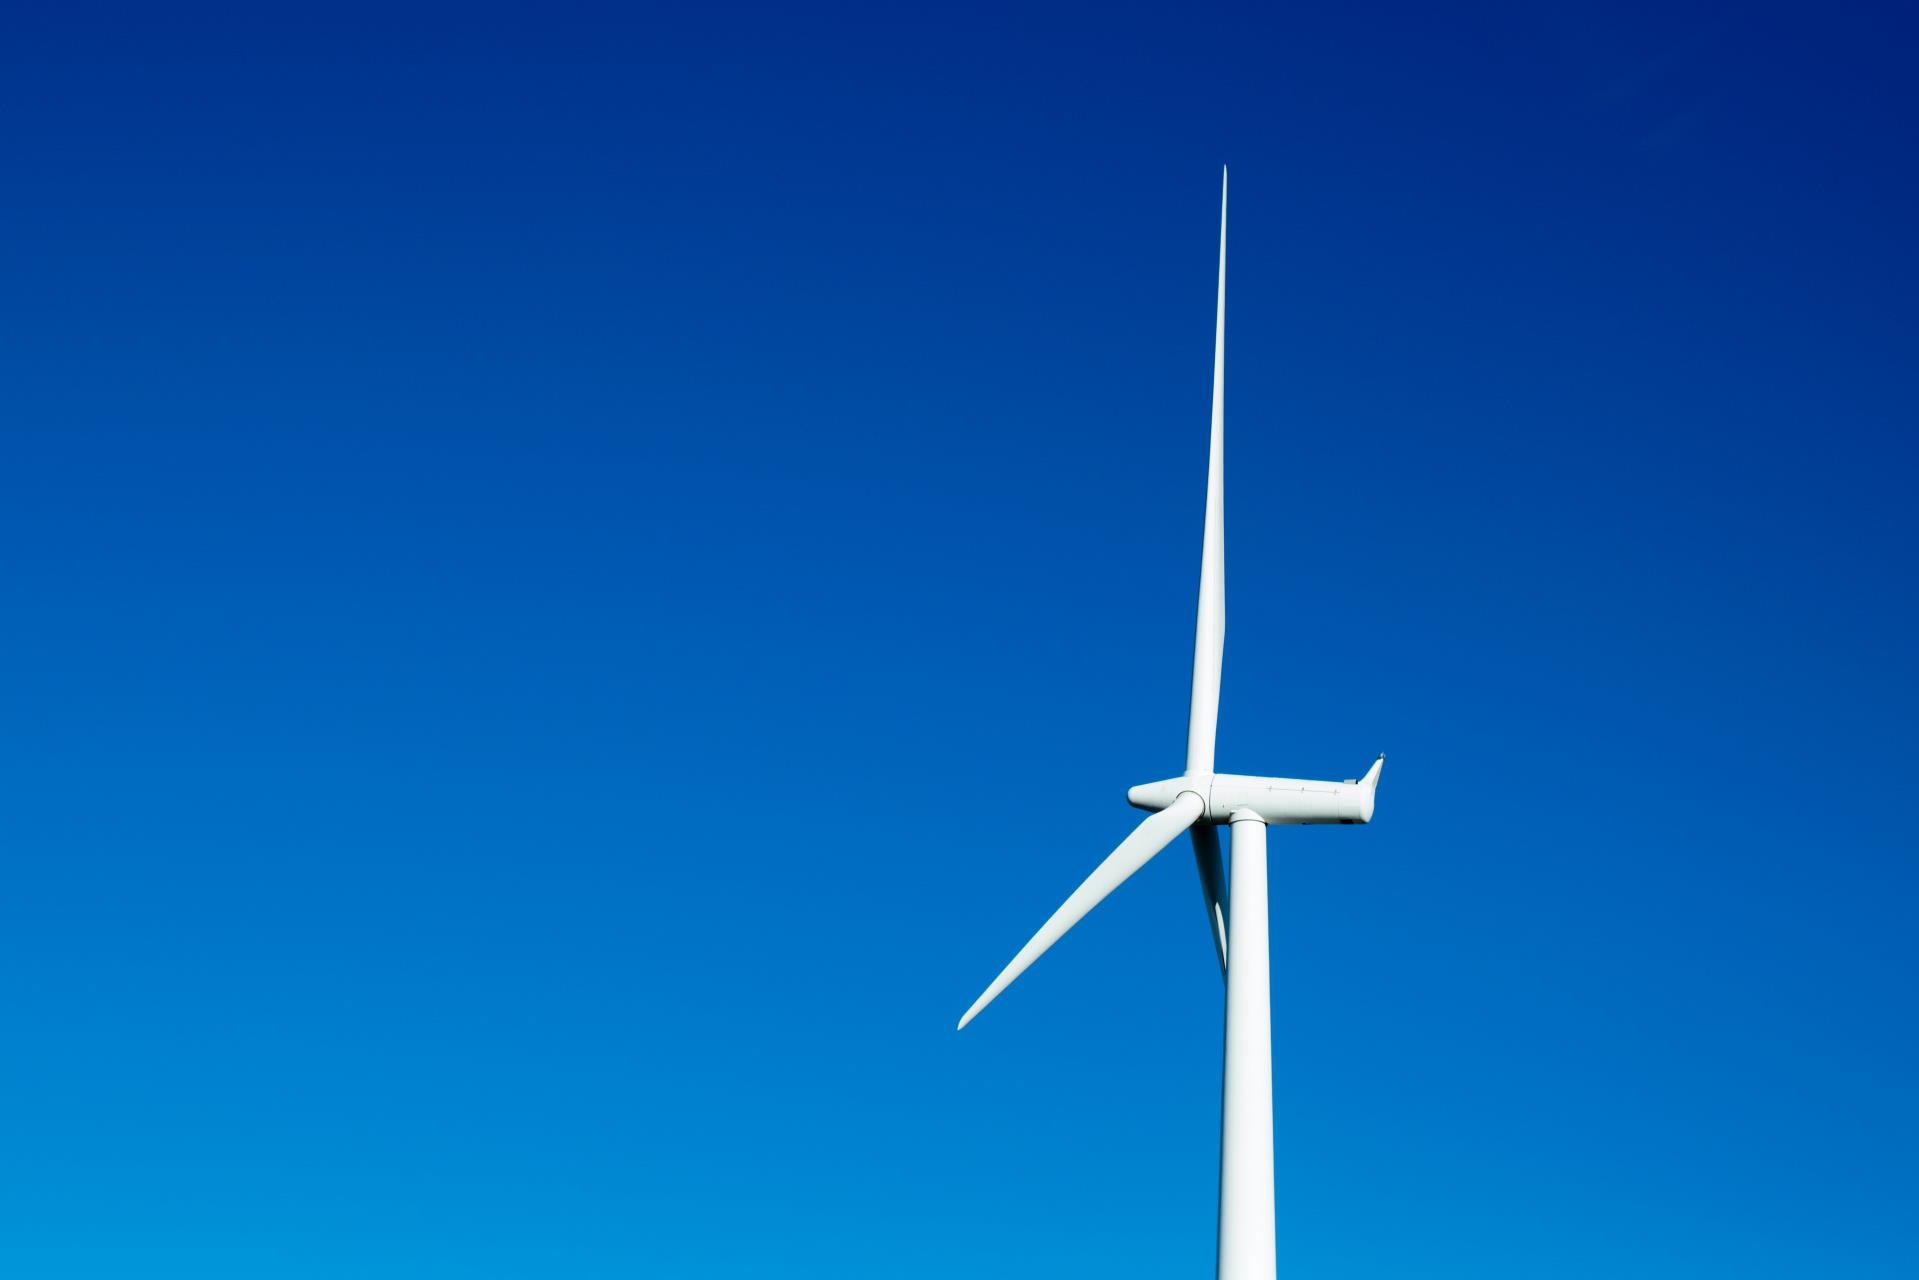 Council publicises correspondence on Proposed Offshore Wind Area